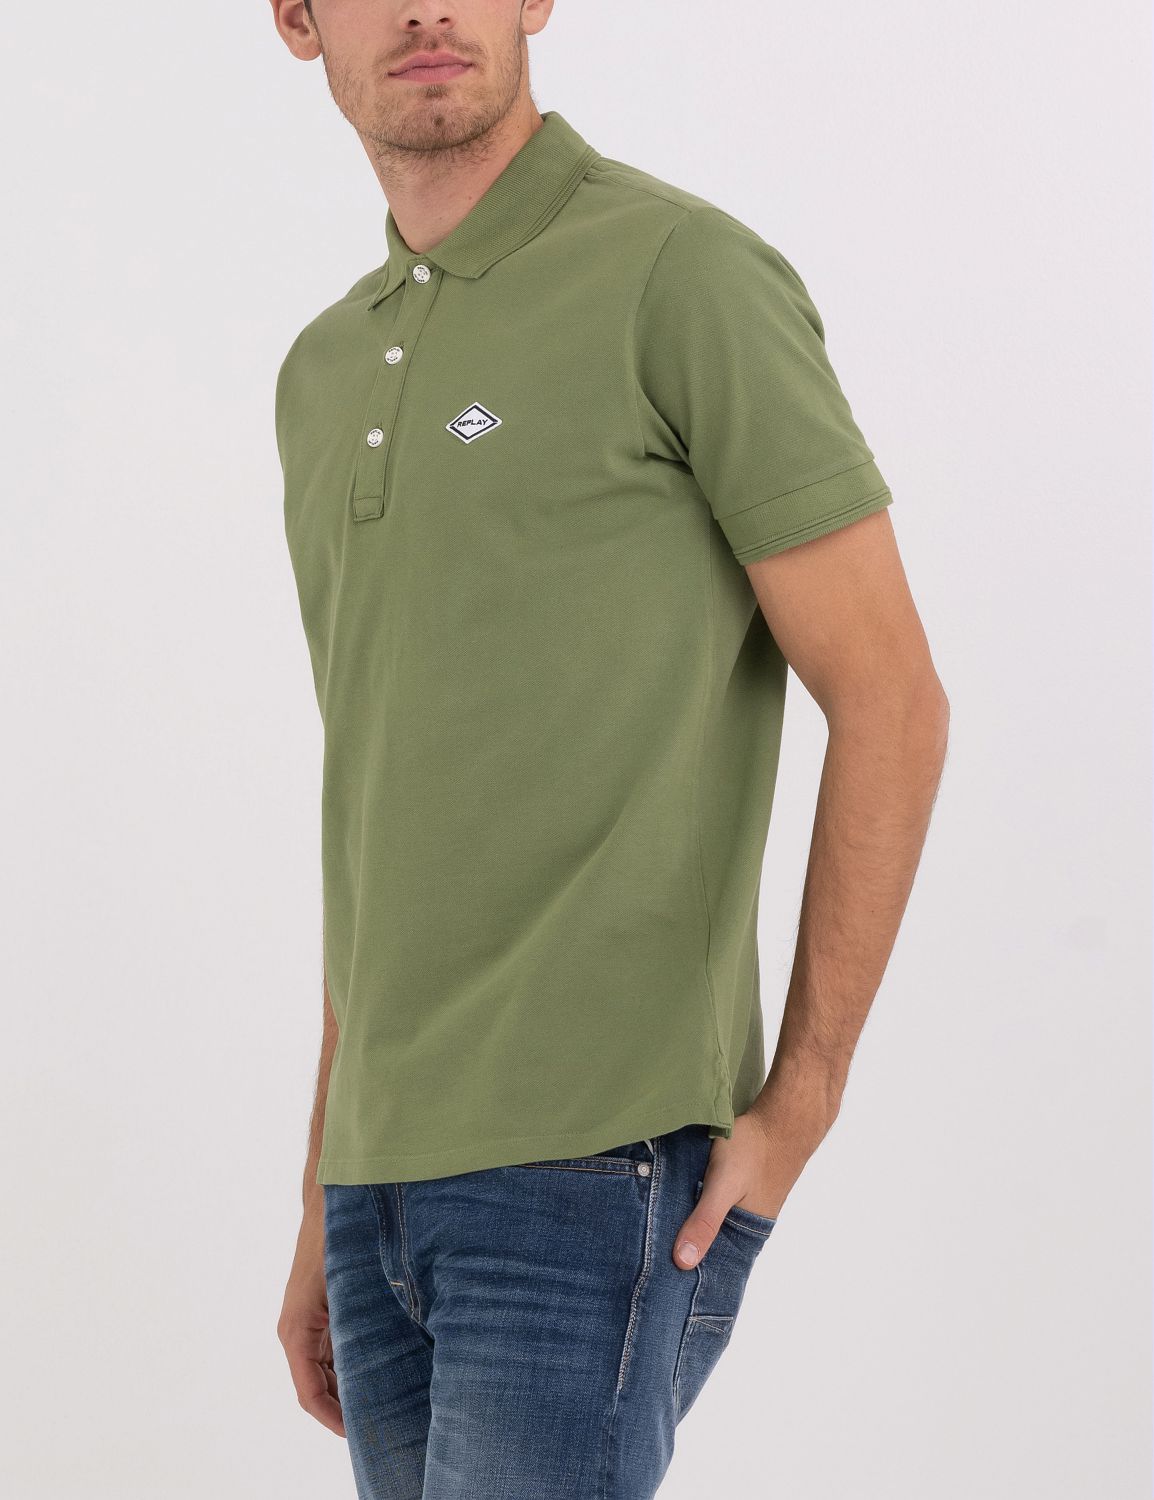 Replay Olive Green Polo T-Shirt